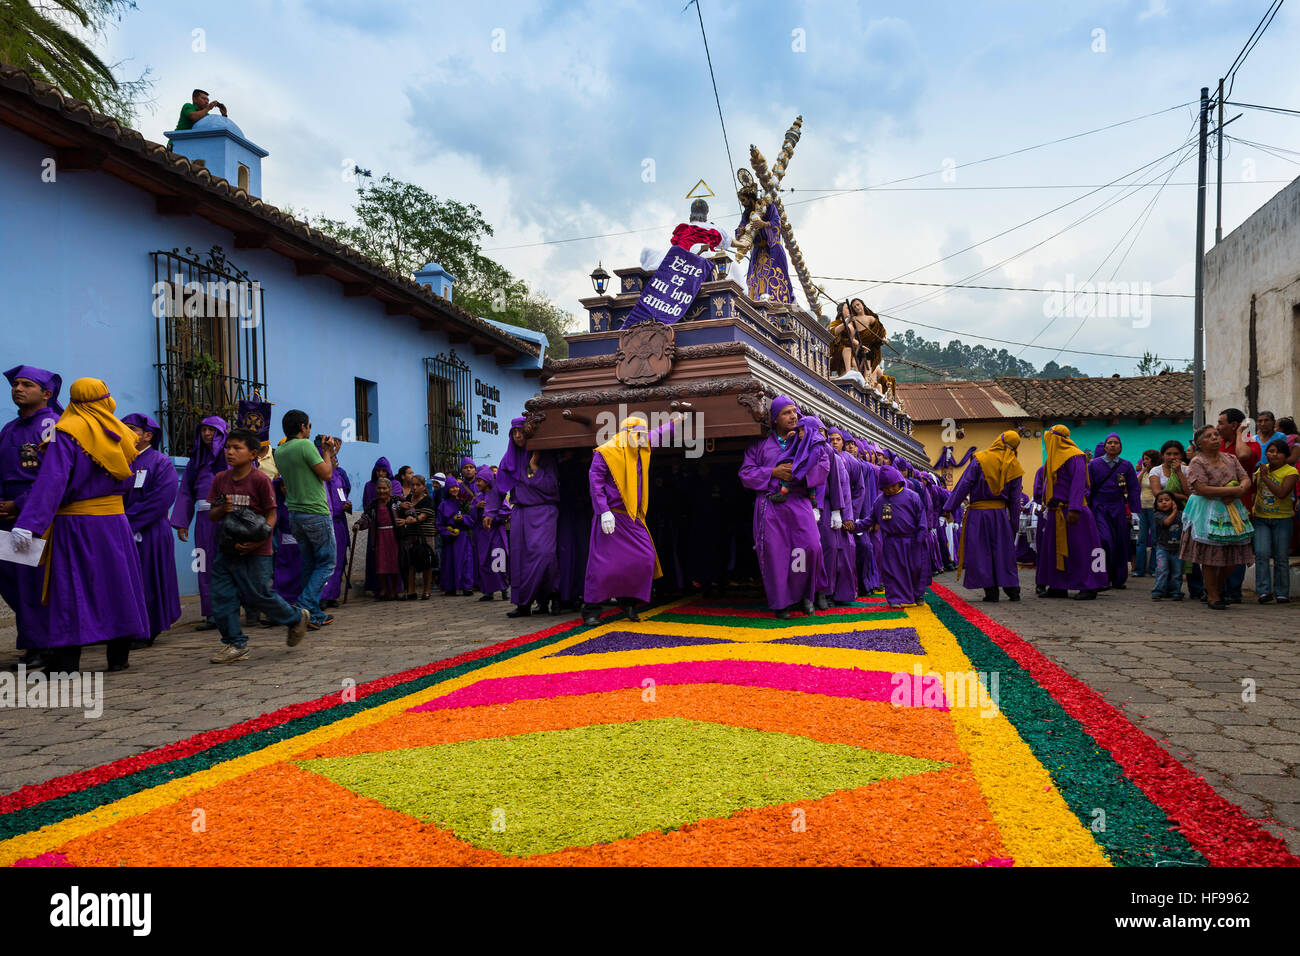 Antigua, Guatemala - April 16, 2014: Man wearing purple robes, carrying a float (anda) during the Easter celebrations in Antigua Stock Photo